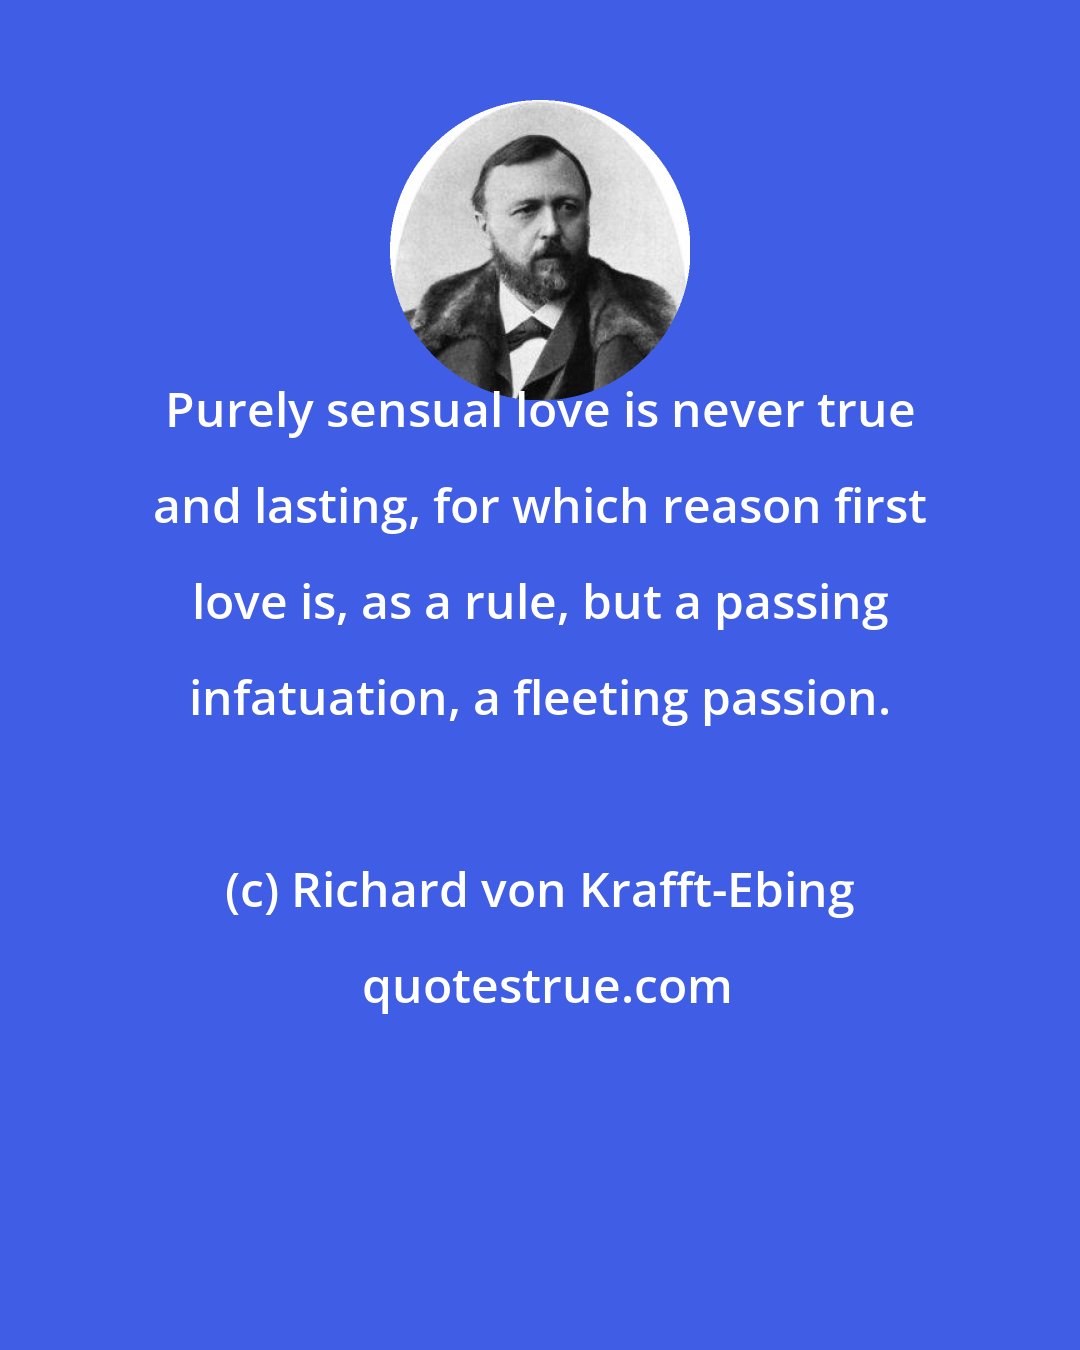 Richard von Krafft-Ebing: Purely sensual love is never true and lasting, for which reason first love is, as a rule, but a passing infatuation, a fleeting passion.